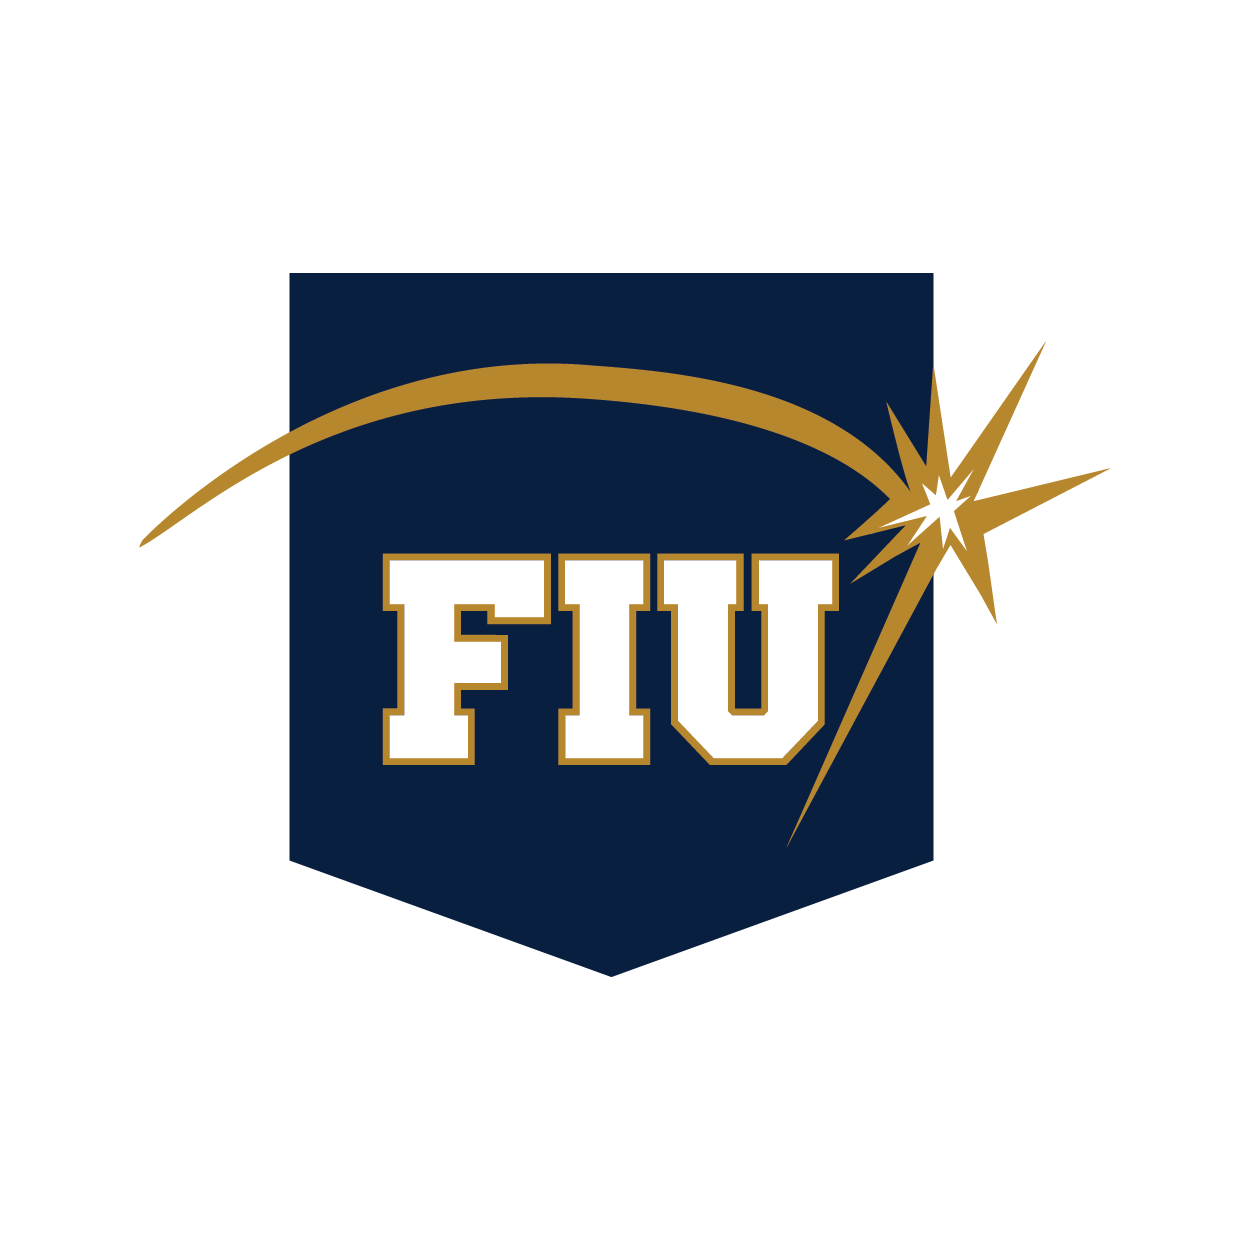 The 2017 pin is a shield shape in navy blue with FIU in the center in white and with a gold spark over it 